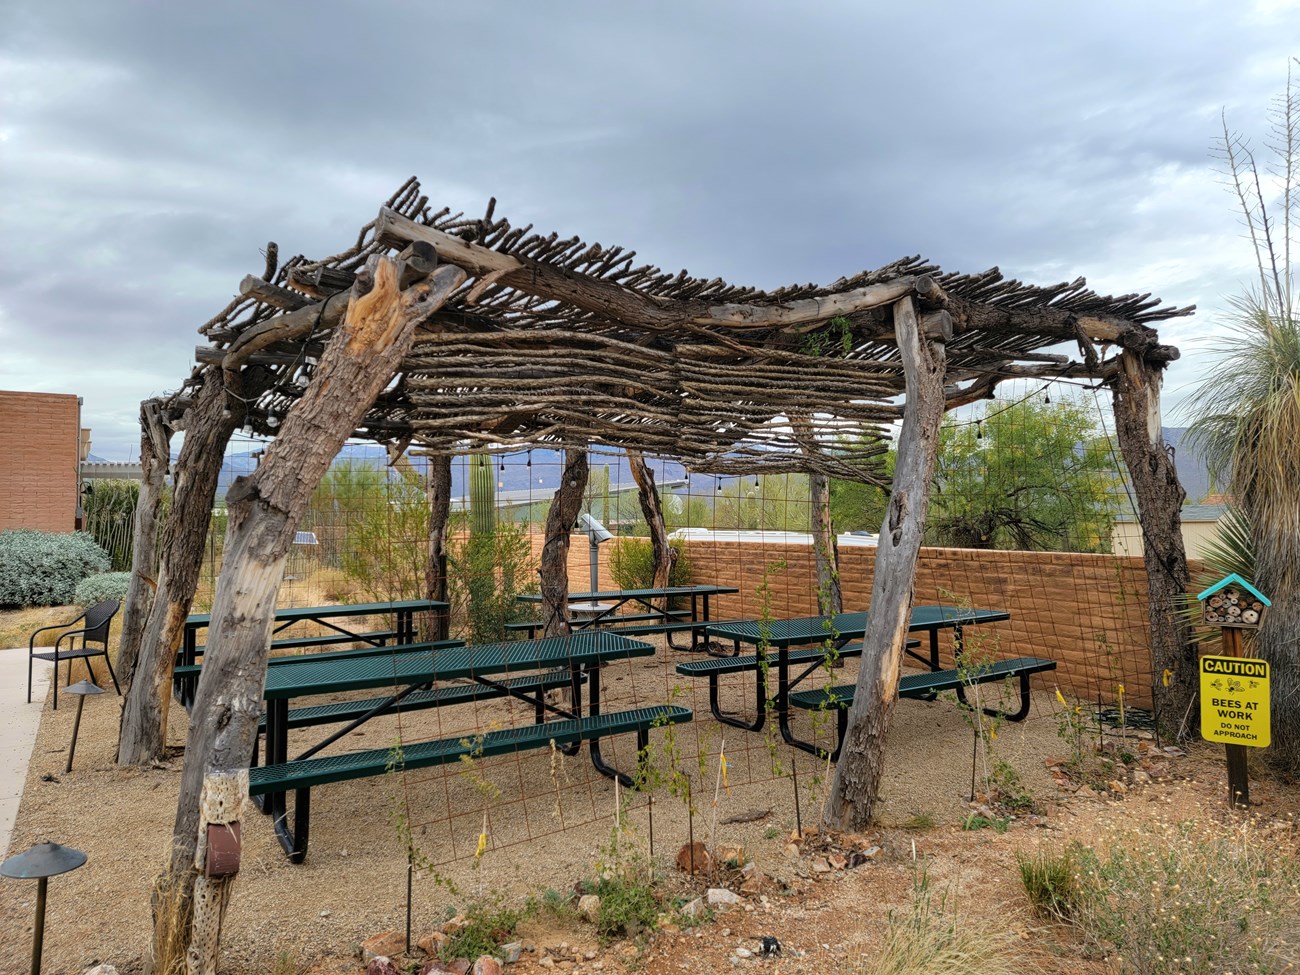 A ramada built of mesquite and tamarisk trunks, roofed with ocotillo branches.